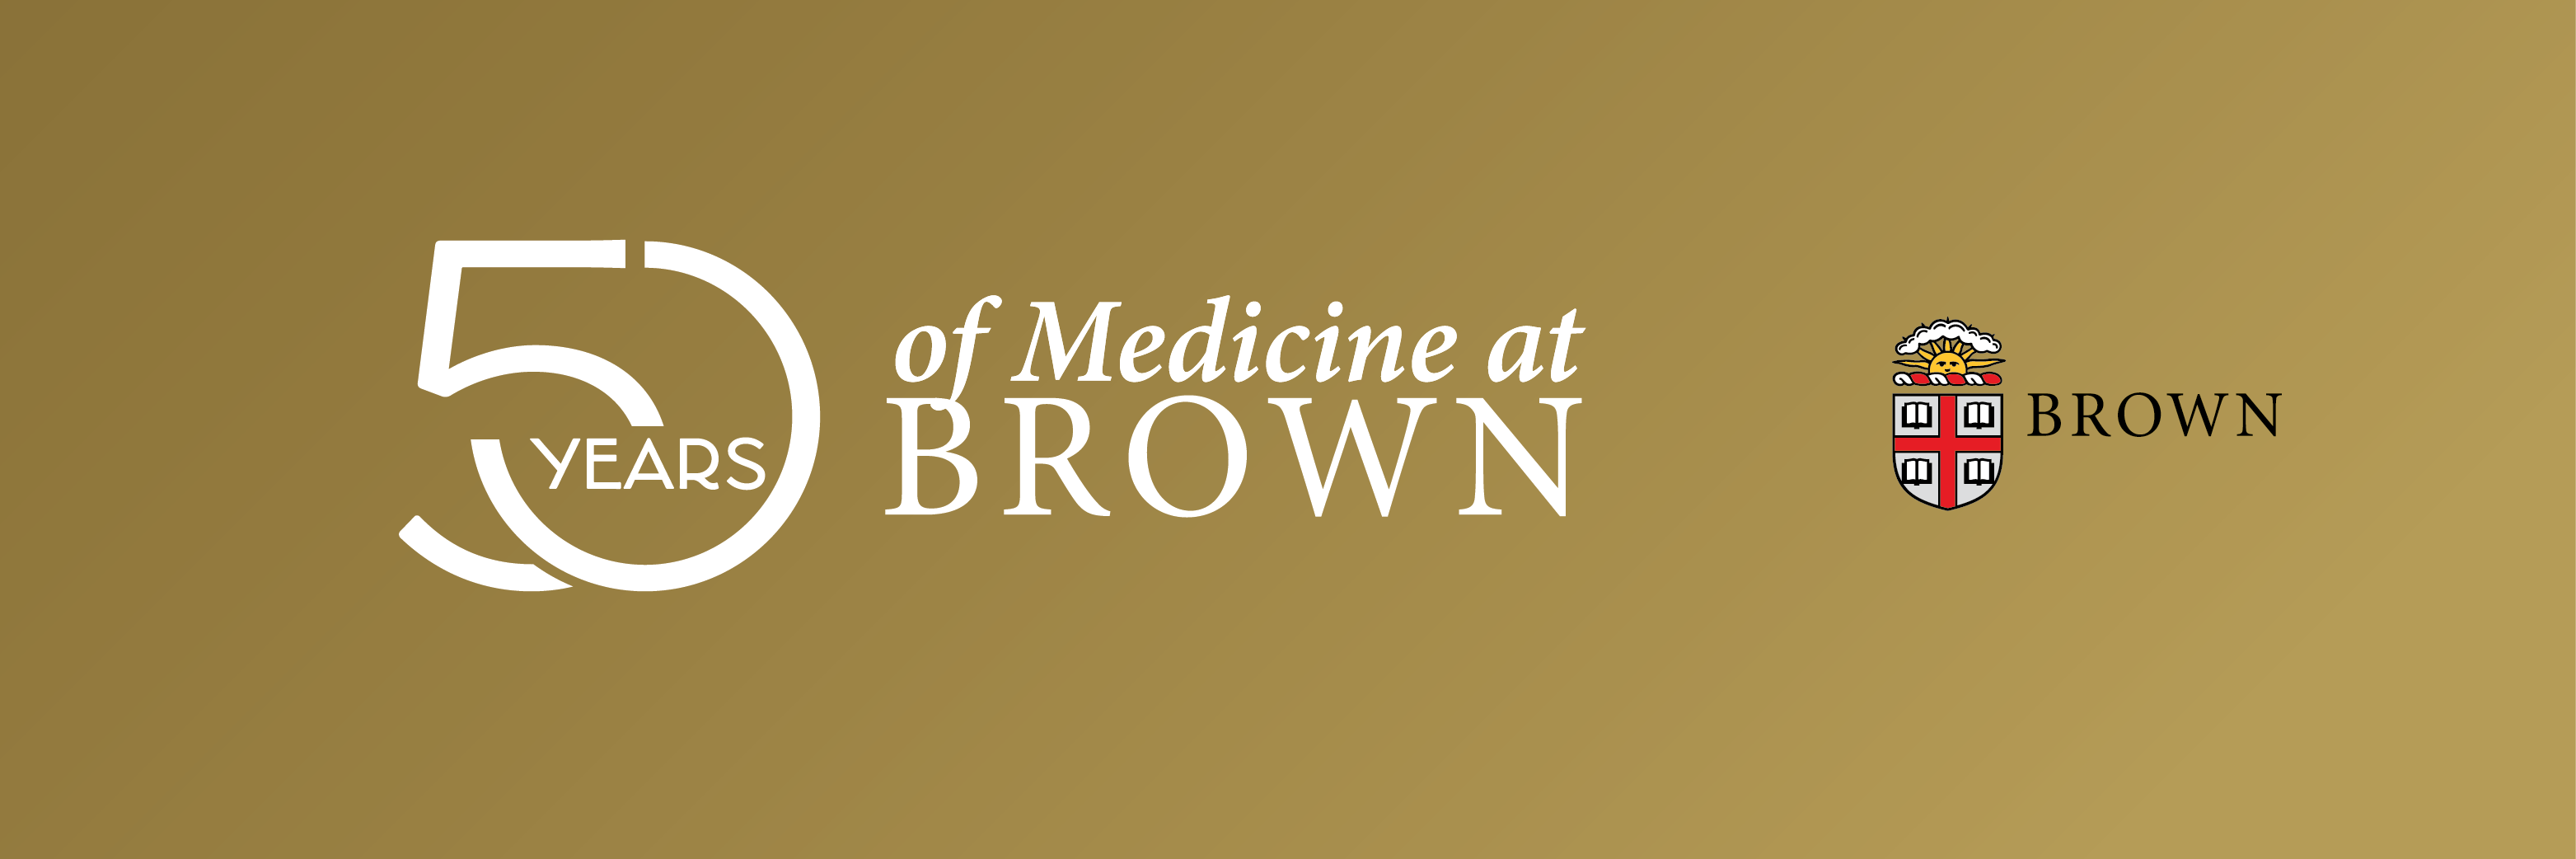 Brown 50 years of medicine Twitter cover